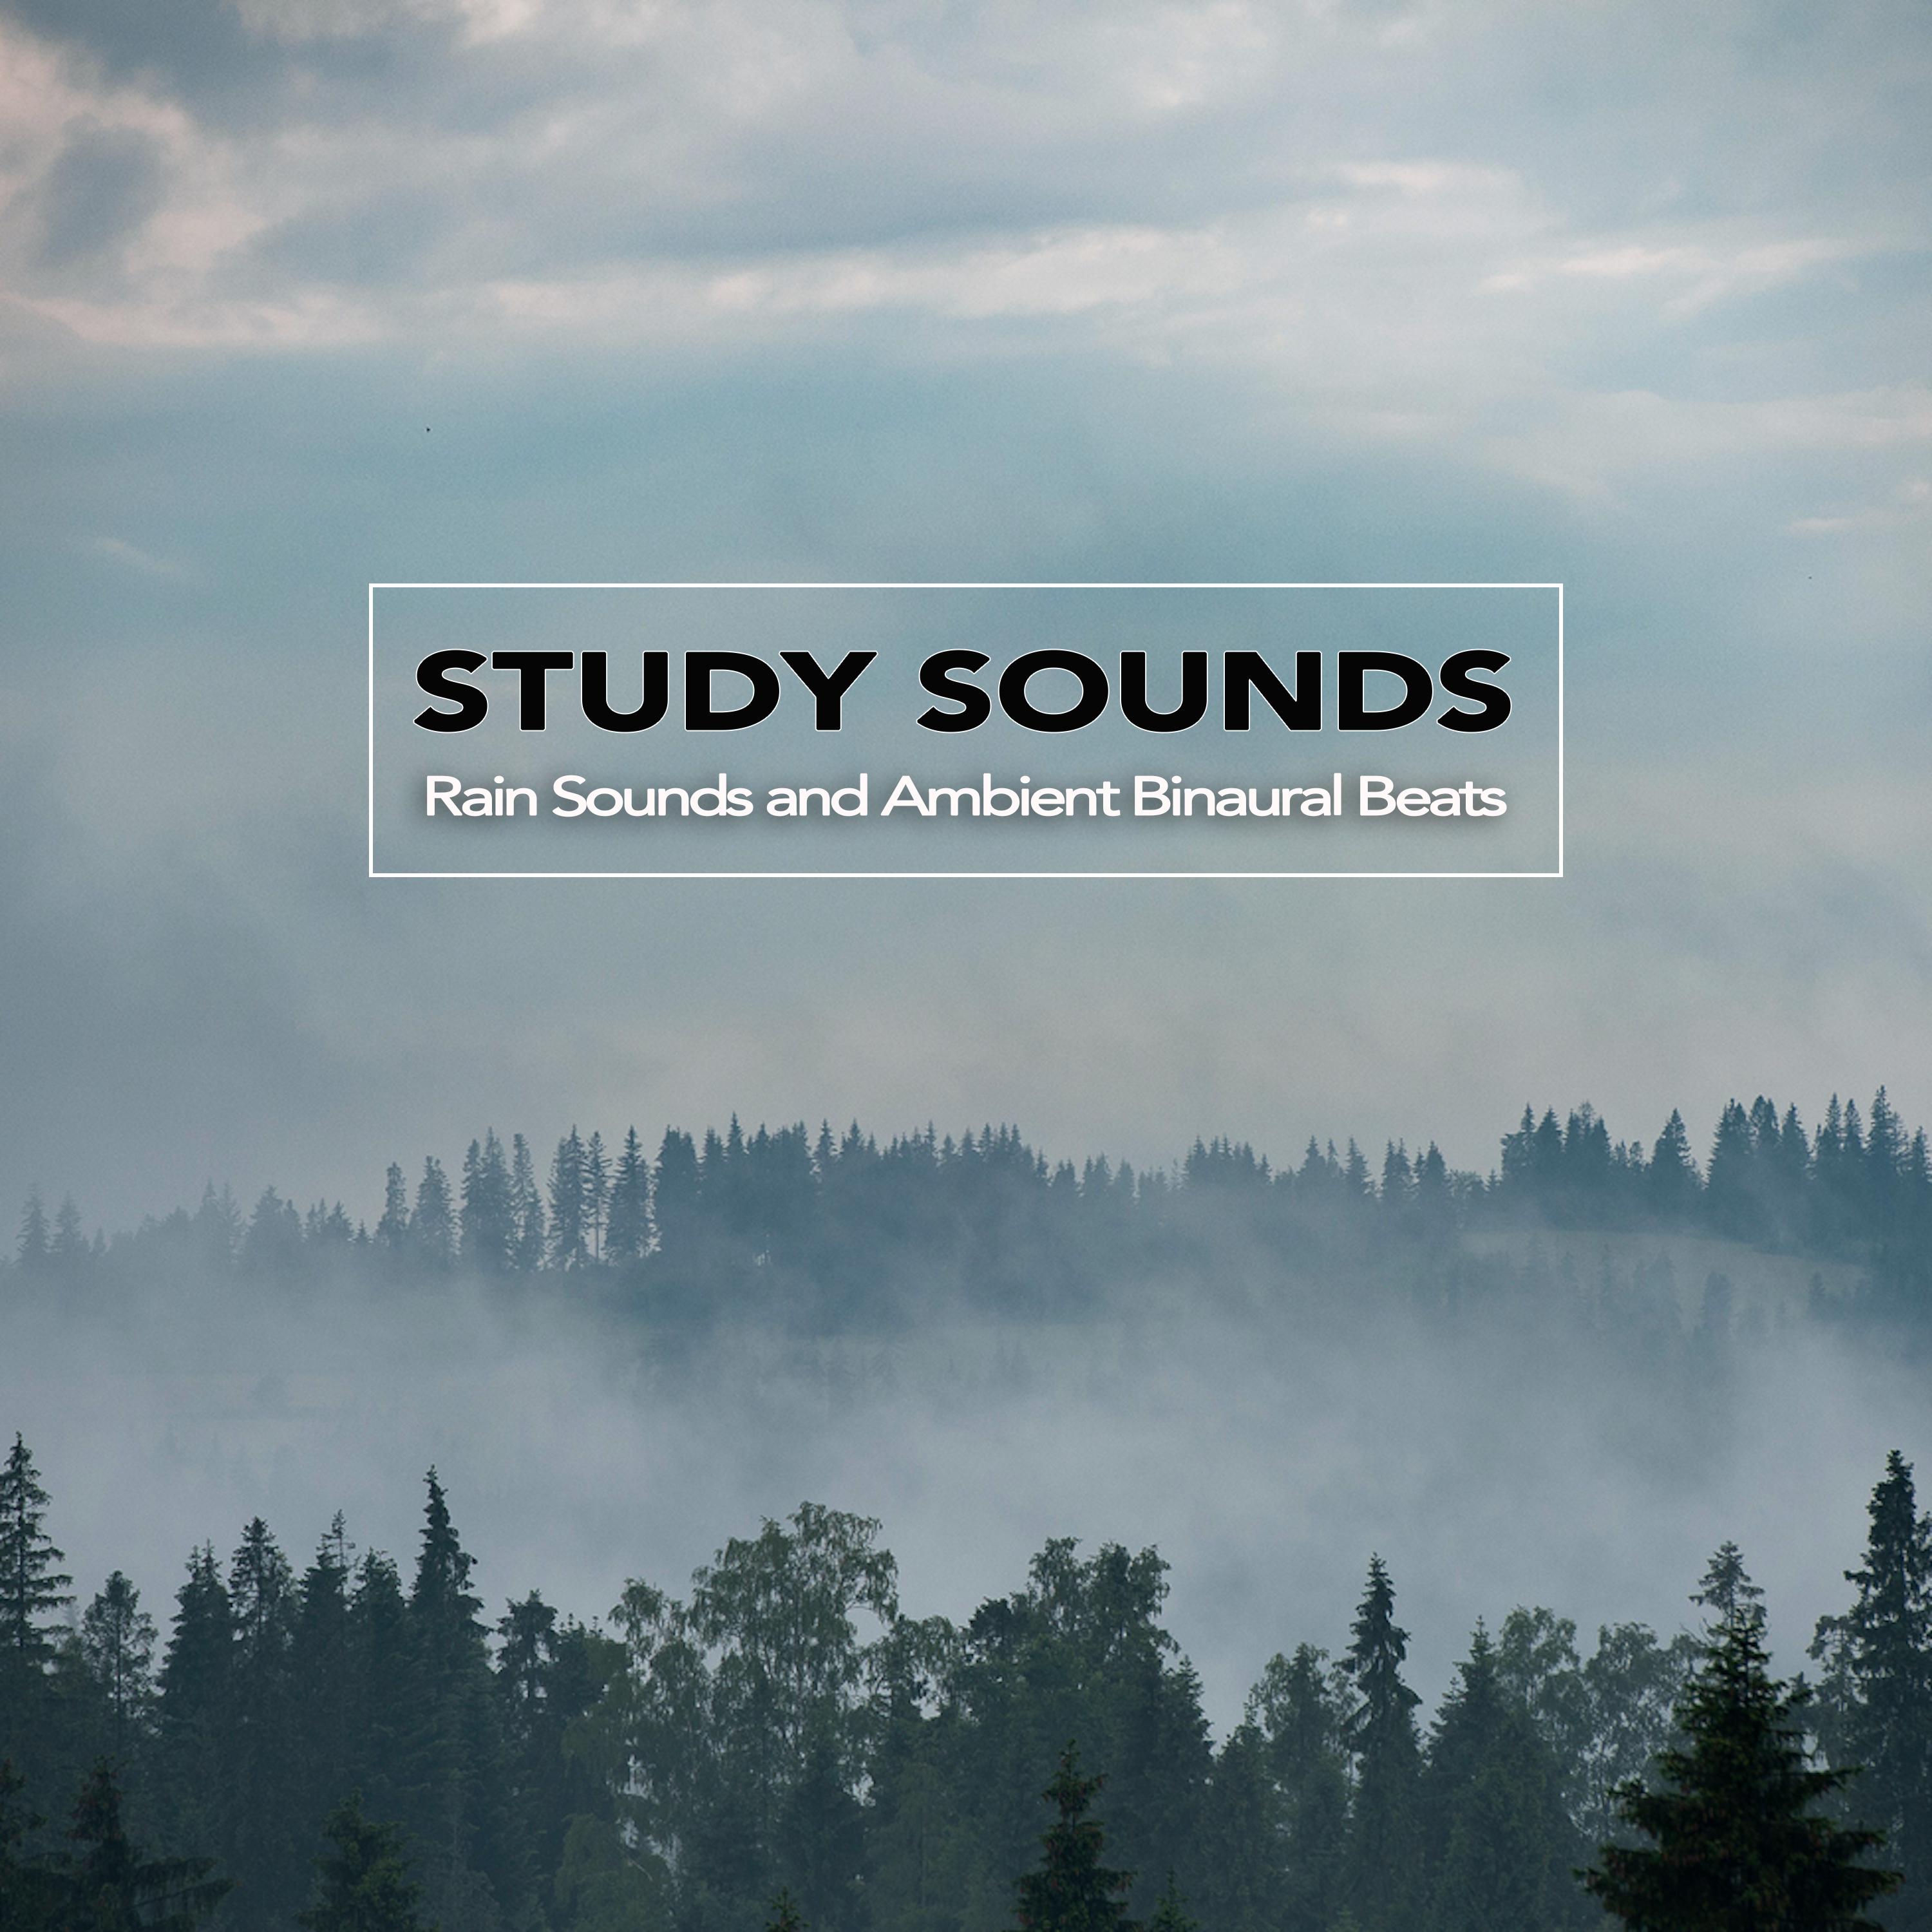 Study Sounds: Rain Sounds and Ambient Binaural Beats, Study Alpha Waves, Isochronic Tones and Music For Brainwave Entrainment and Deep Focus and Concentration